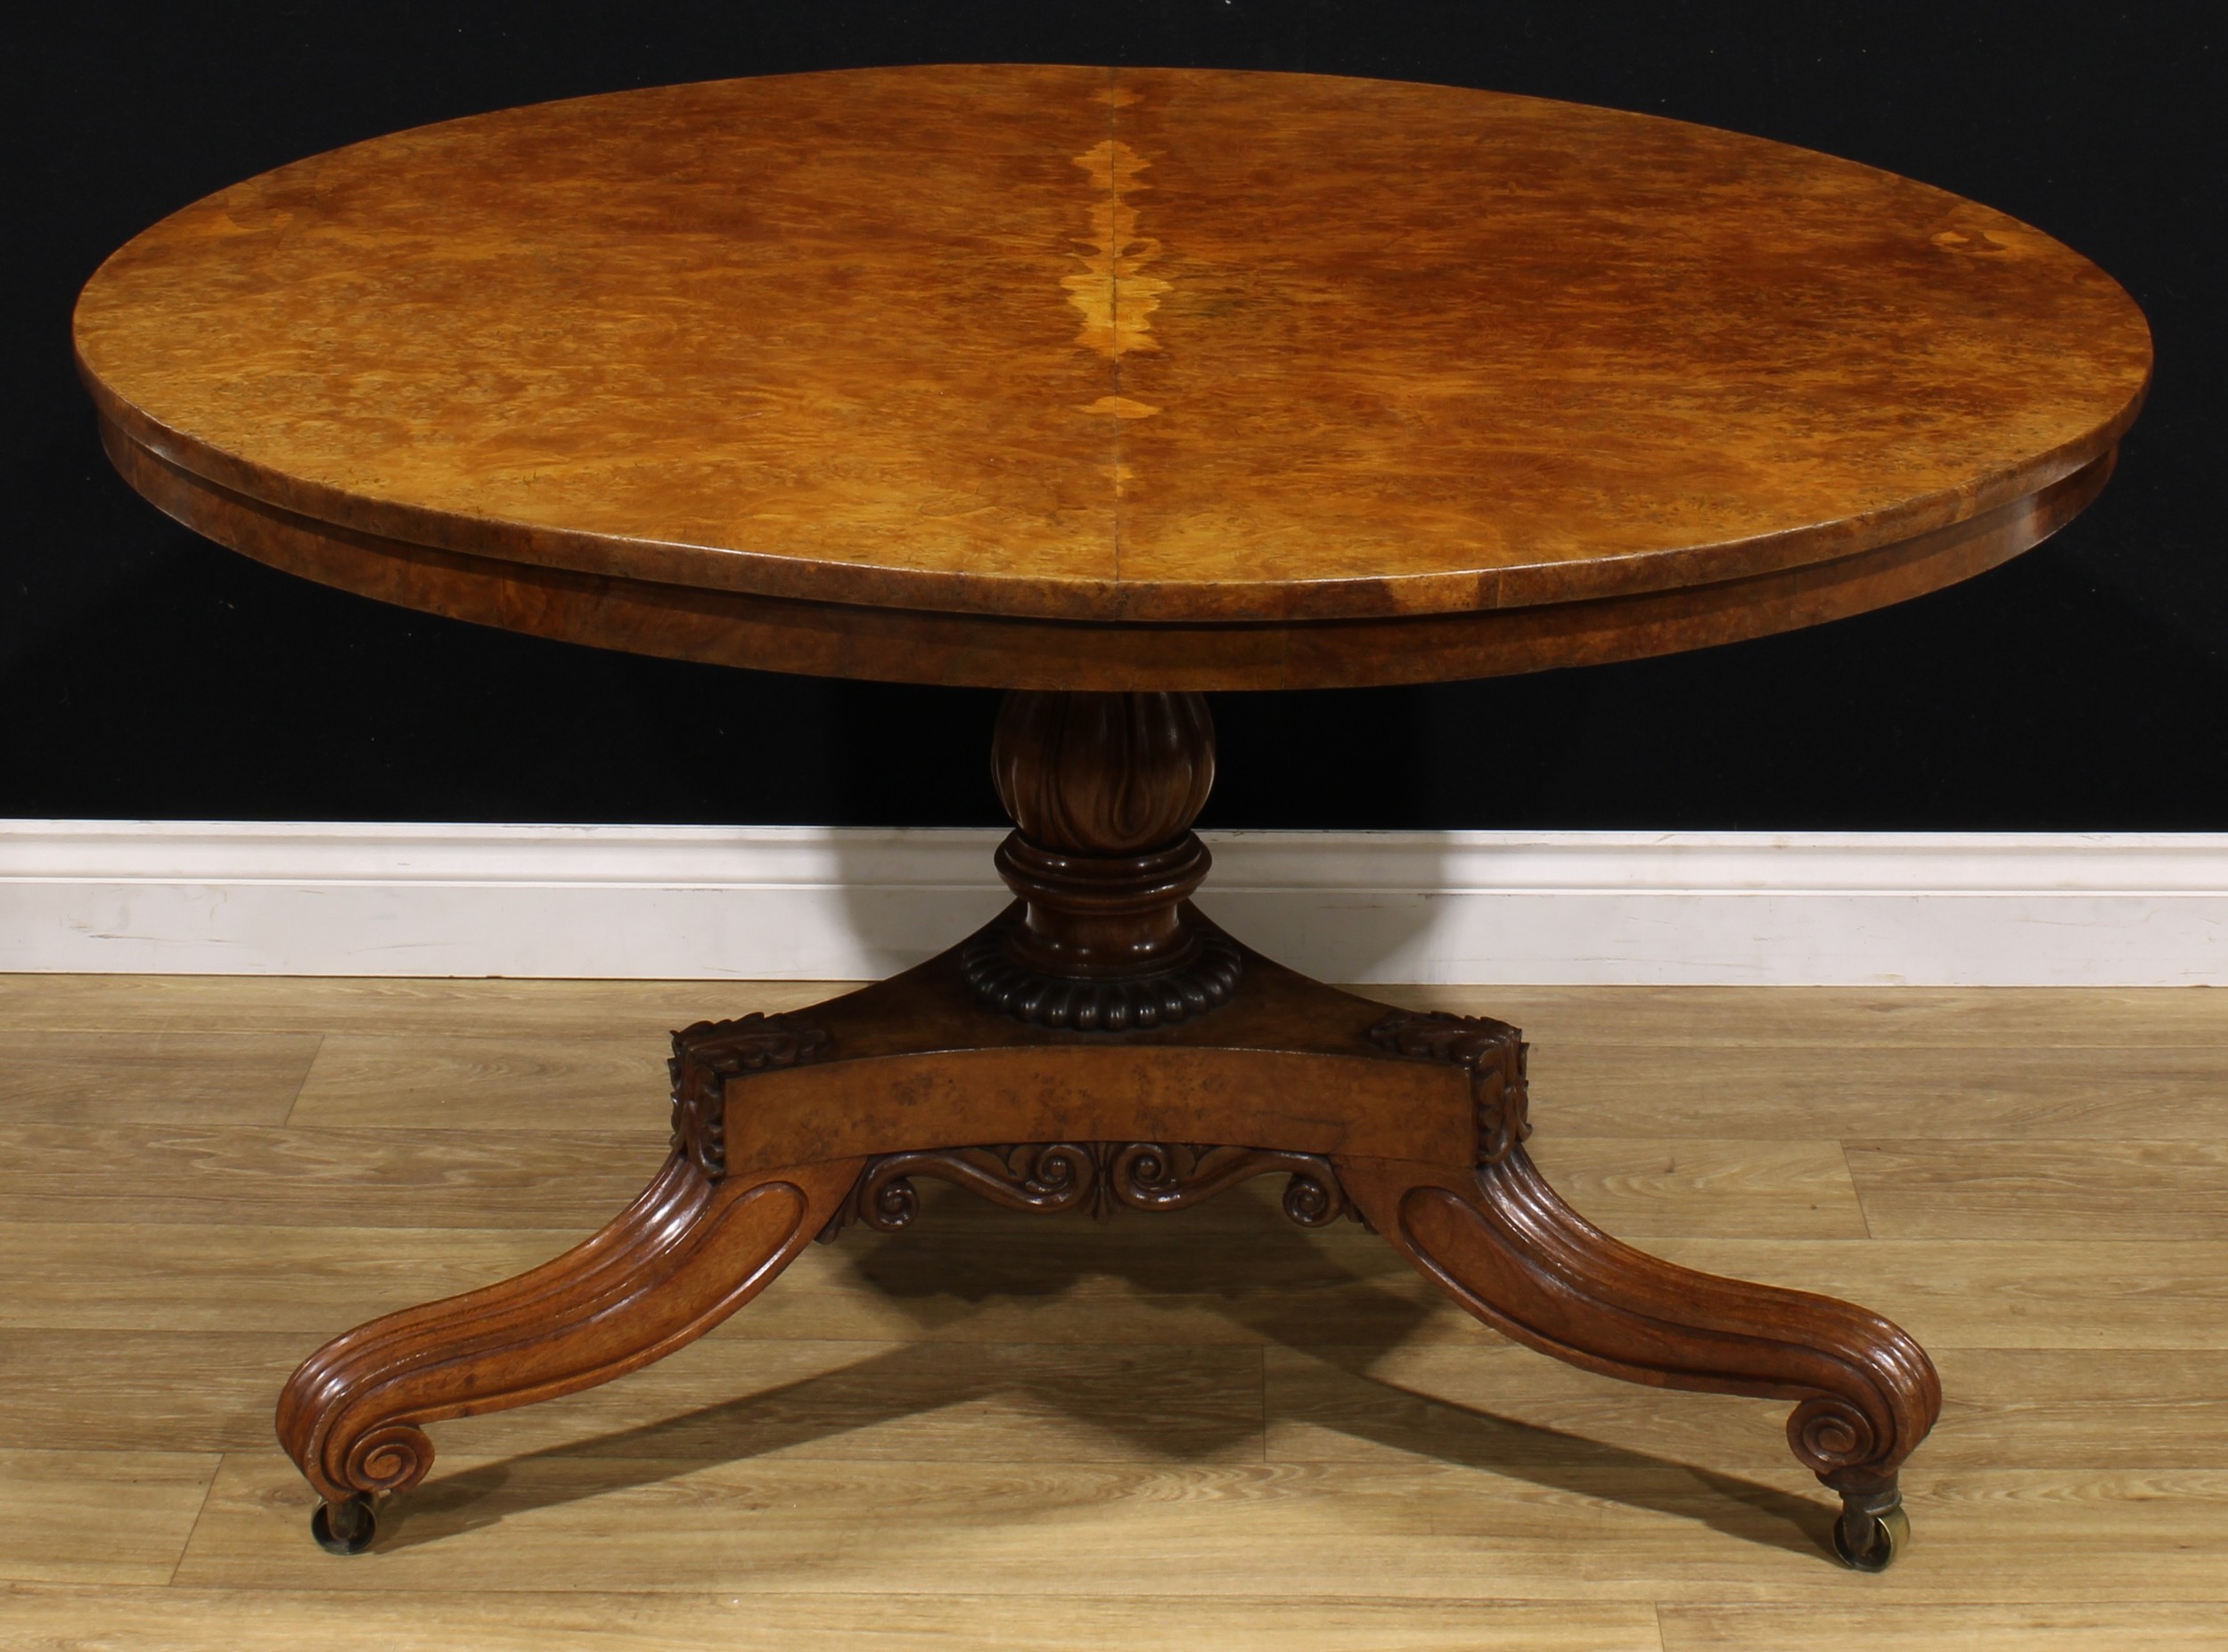 A Post-Regency pollard oak and oak centre table, in the manner of William Trotter of Ballindean, - Image 2 of 4